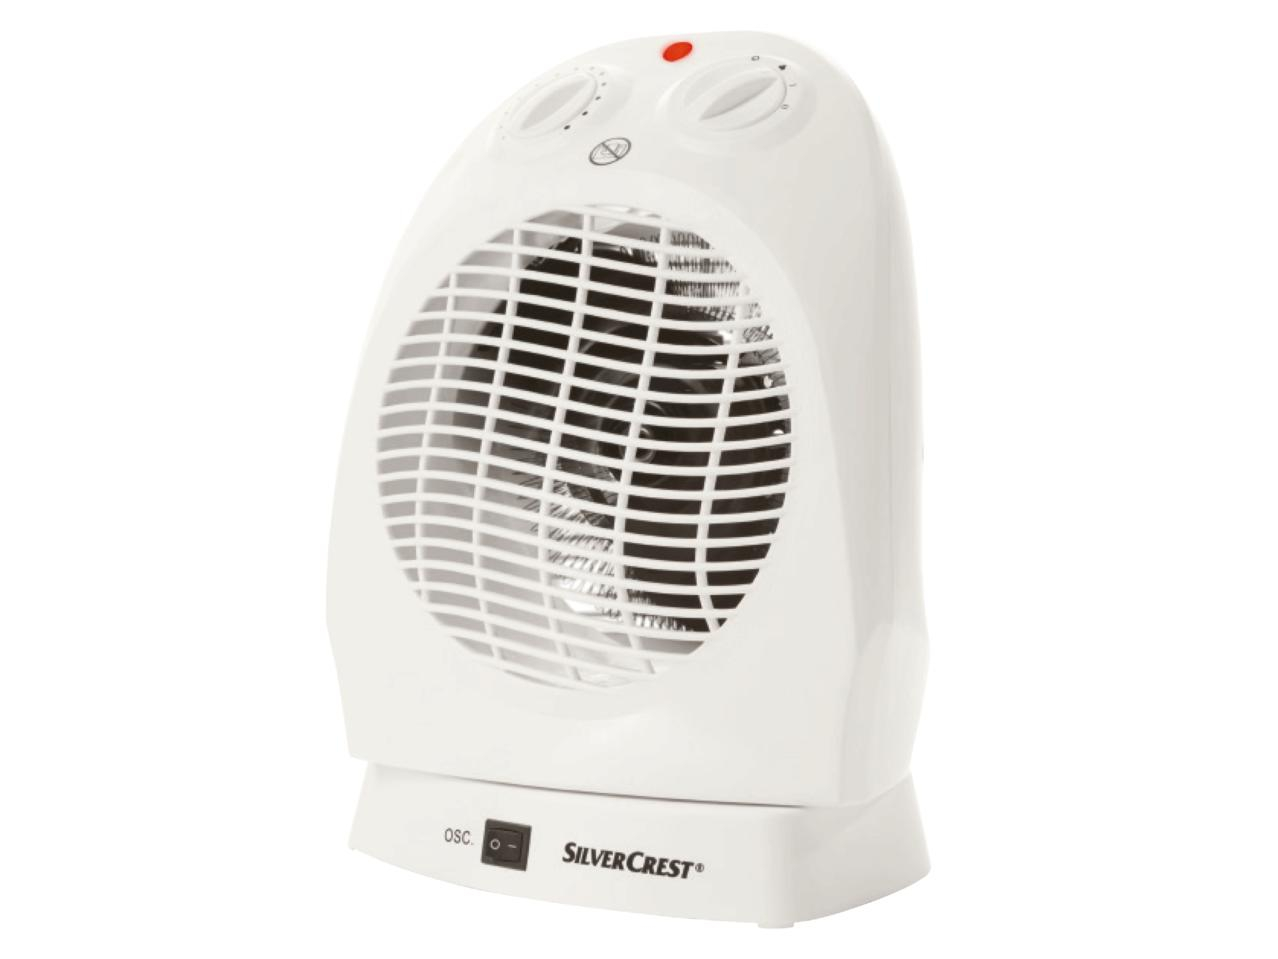 Silvercrest 2000w Rotating Fan Heater Lidl Ireland pertaining to proportions 1278 X 959